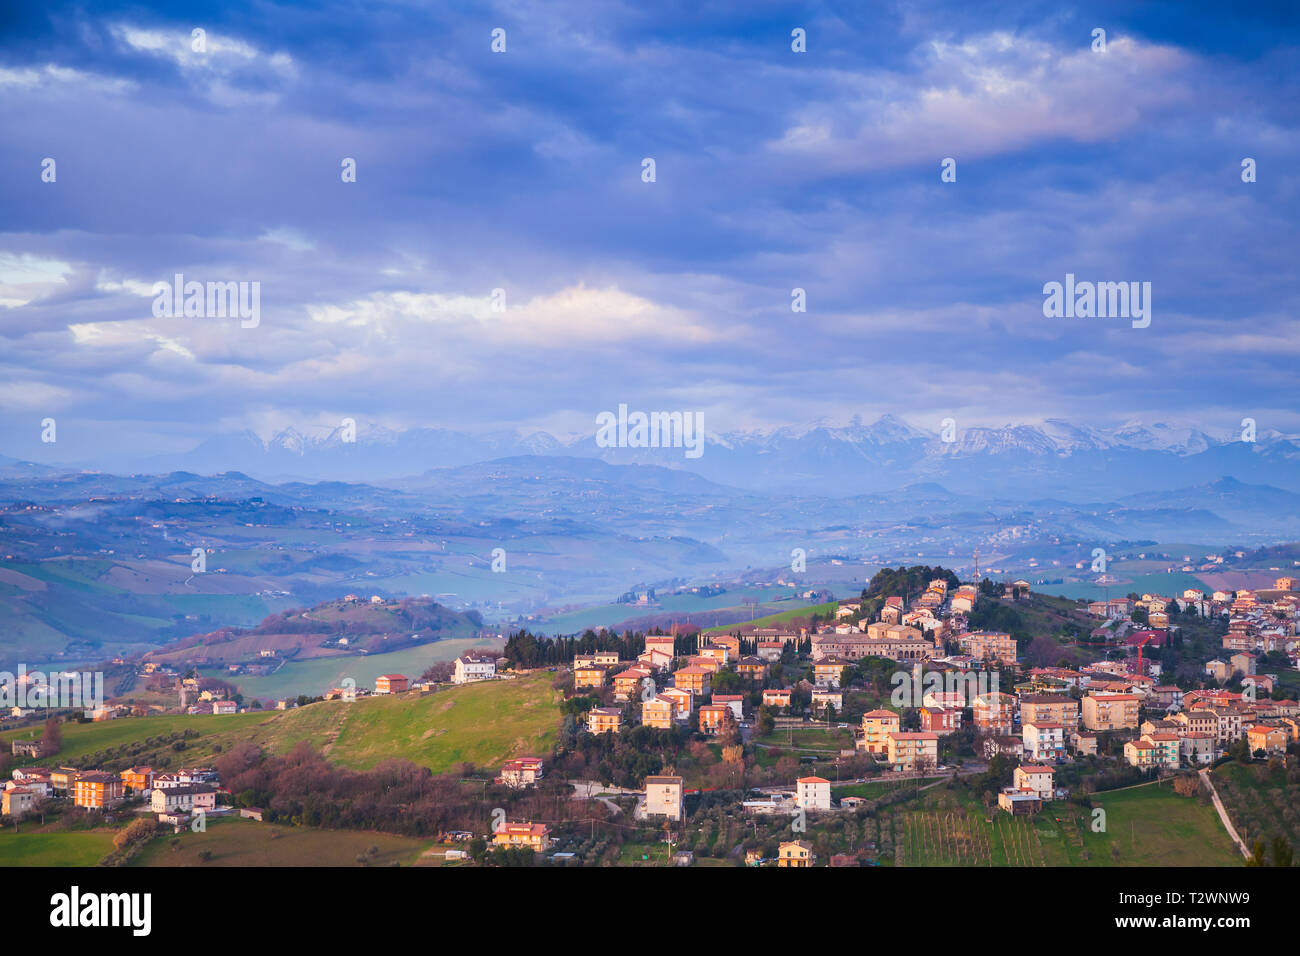 Italian countryside. Rural landscape. Province of Fermo, Italy. Village on hills under cloudy sky Stock Photo